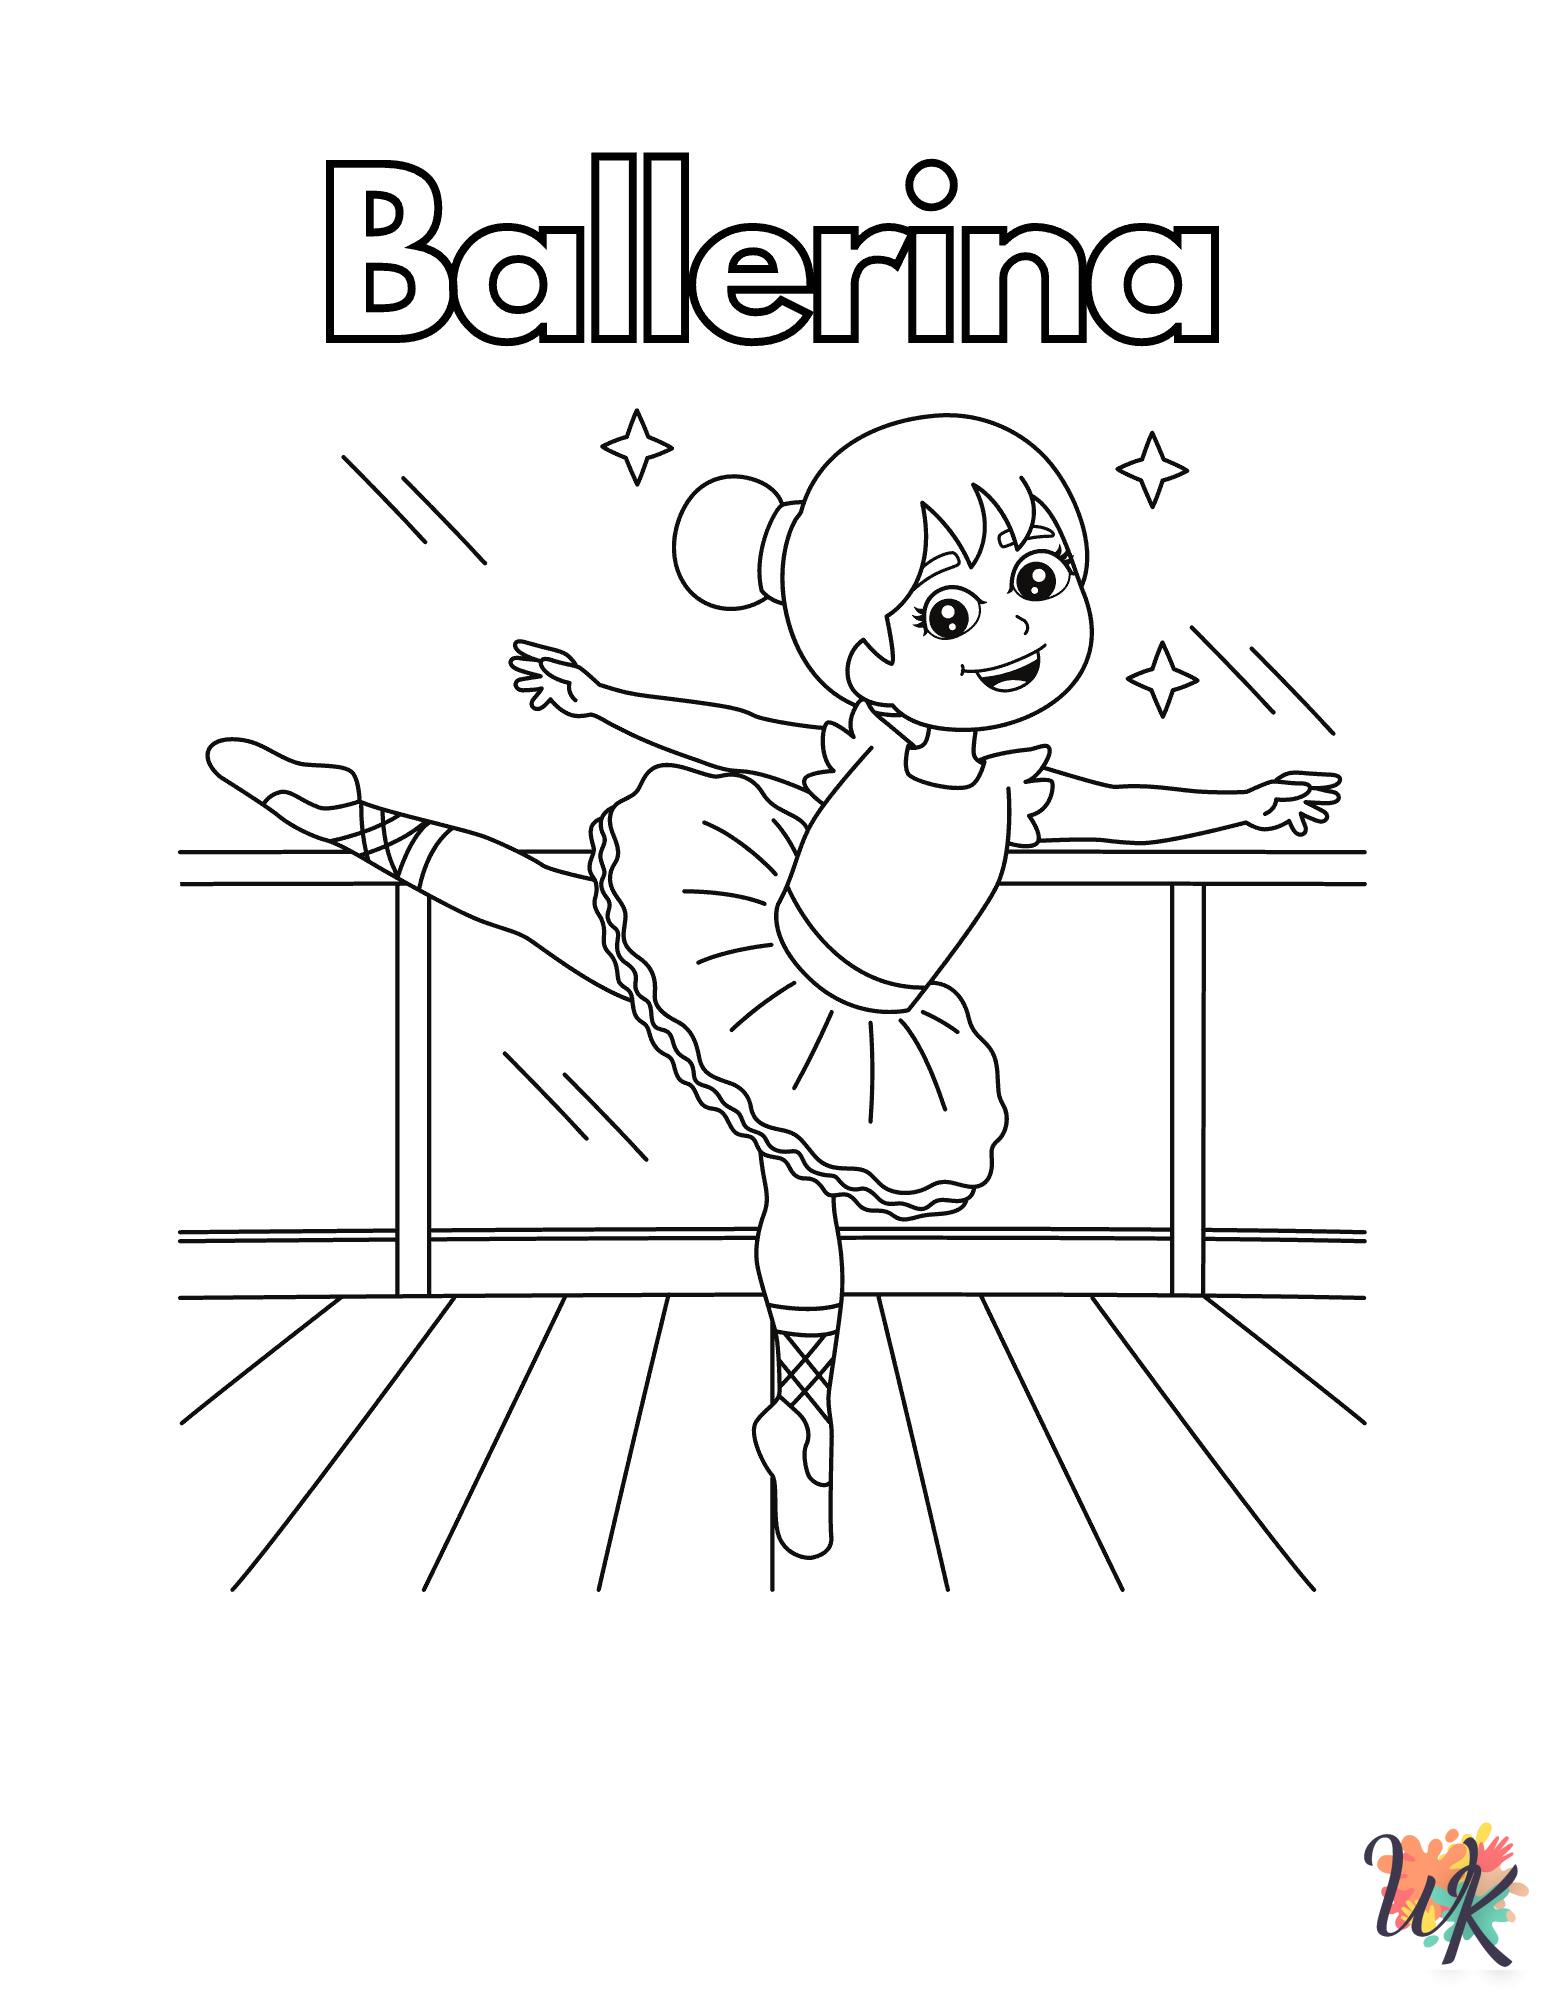 fun Ballerina coloring pages